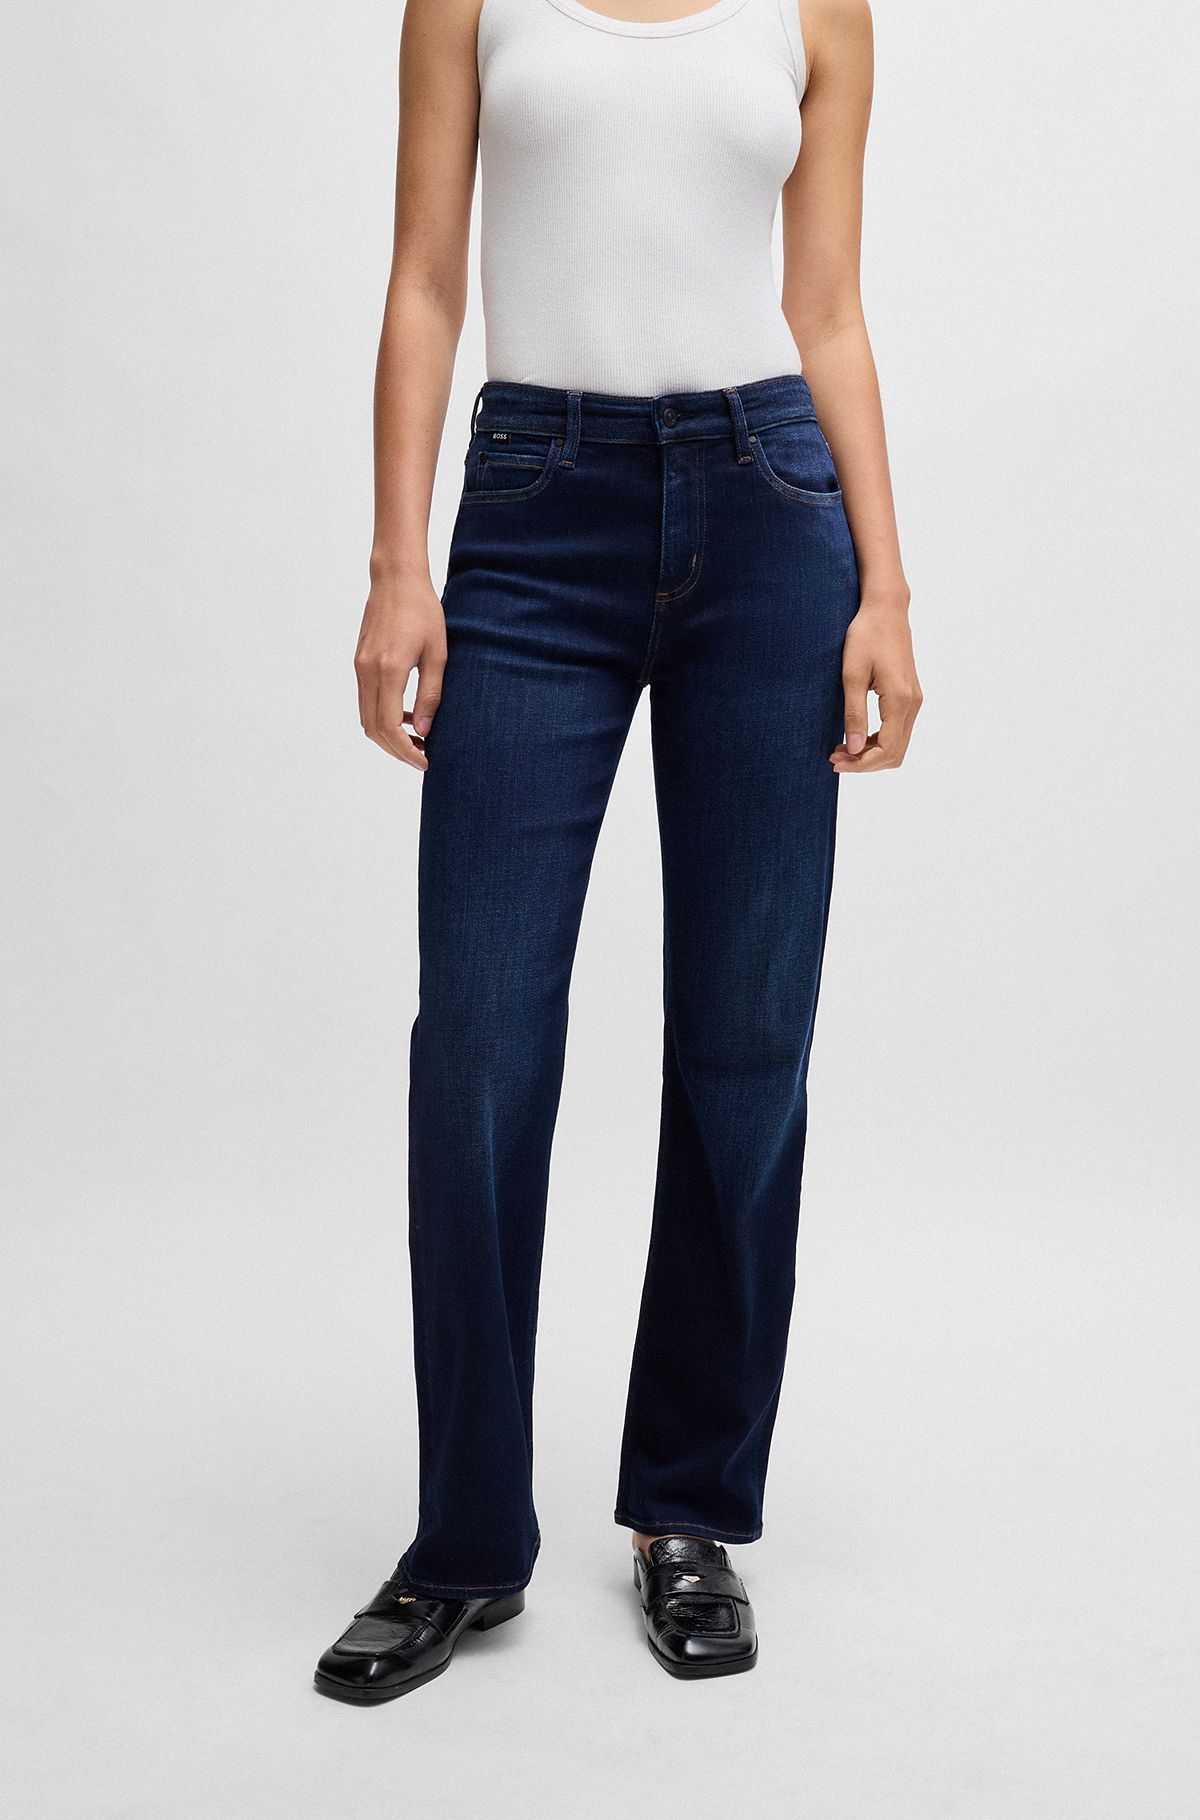 Juniors By Lifestyle Jeans - Buy Juniors By Lifestyle Jeans online